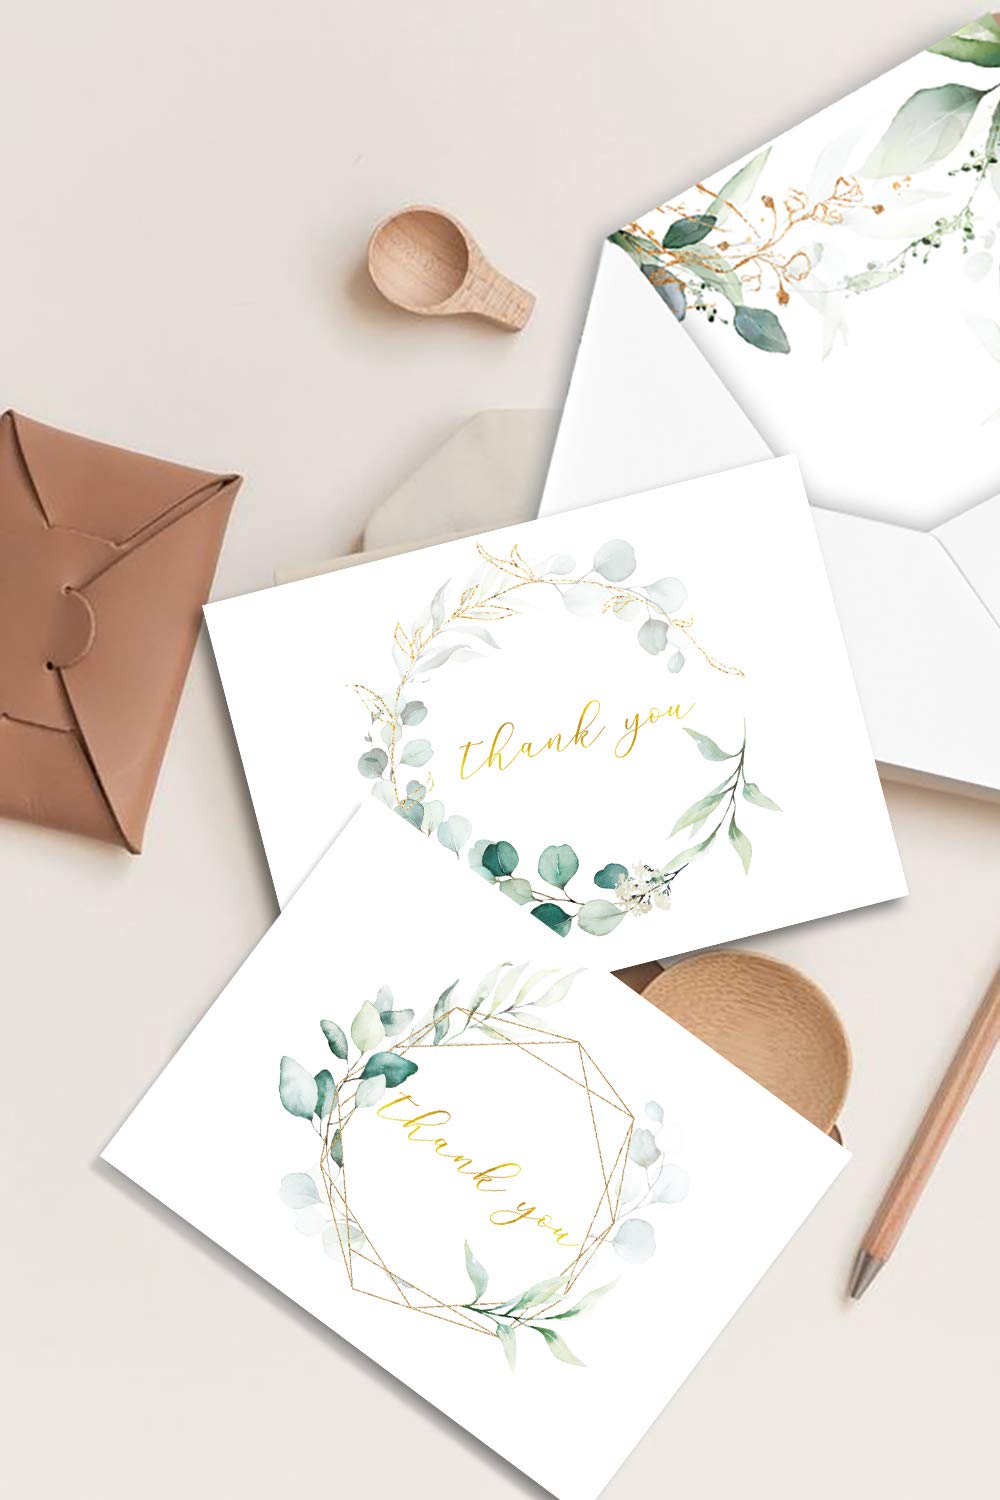 AMNADOF 100 Eucalyptus Gold Foil Thank You Cards Bulk - Blank Note Cards with Greenery Envelopes – Include Stickers, Perfect for Wedding,Baby Shower, Bridal Shower and All Occasions